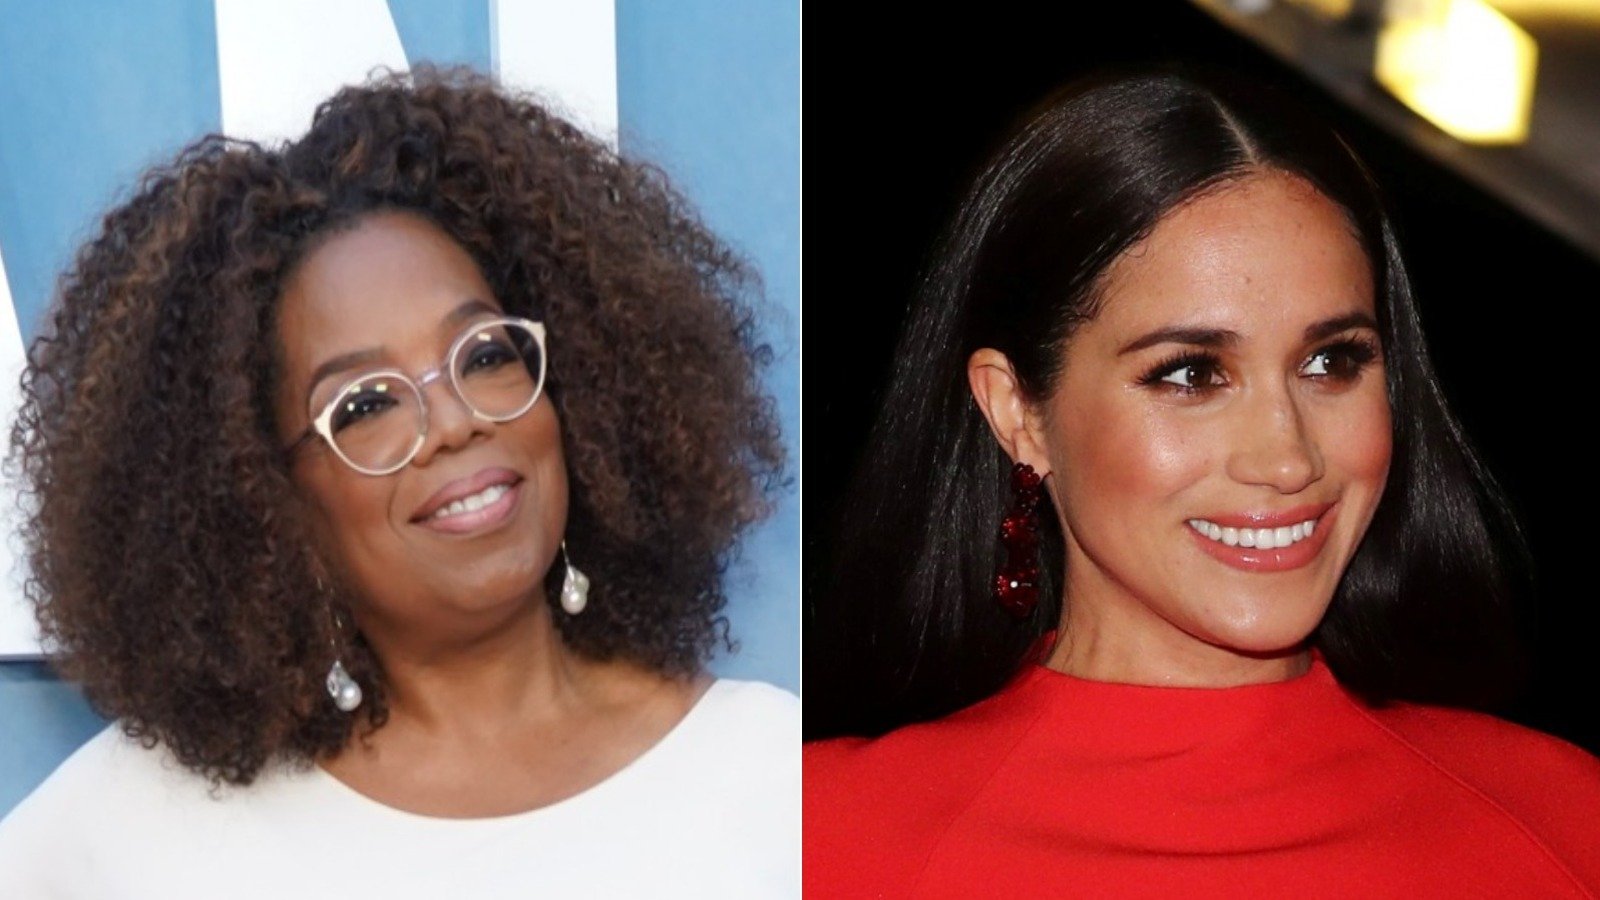 The Truth About Meghan Markle's Friendship With Oprah